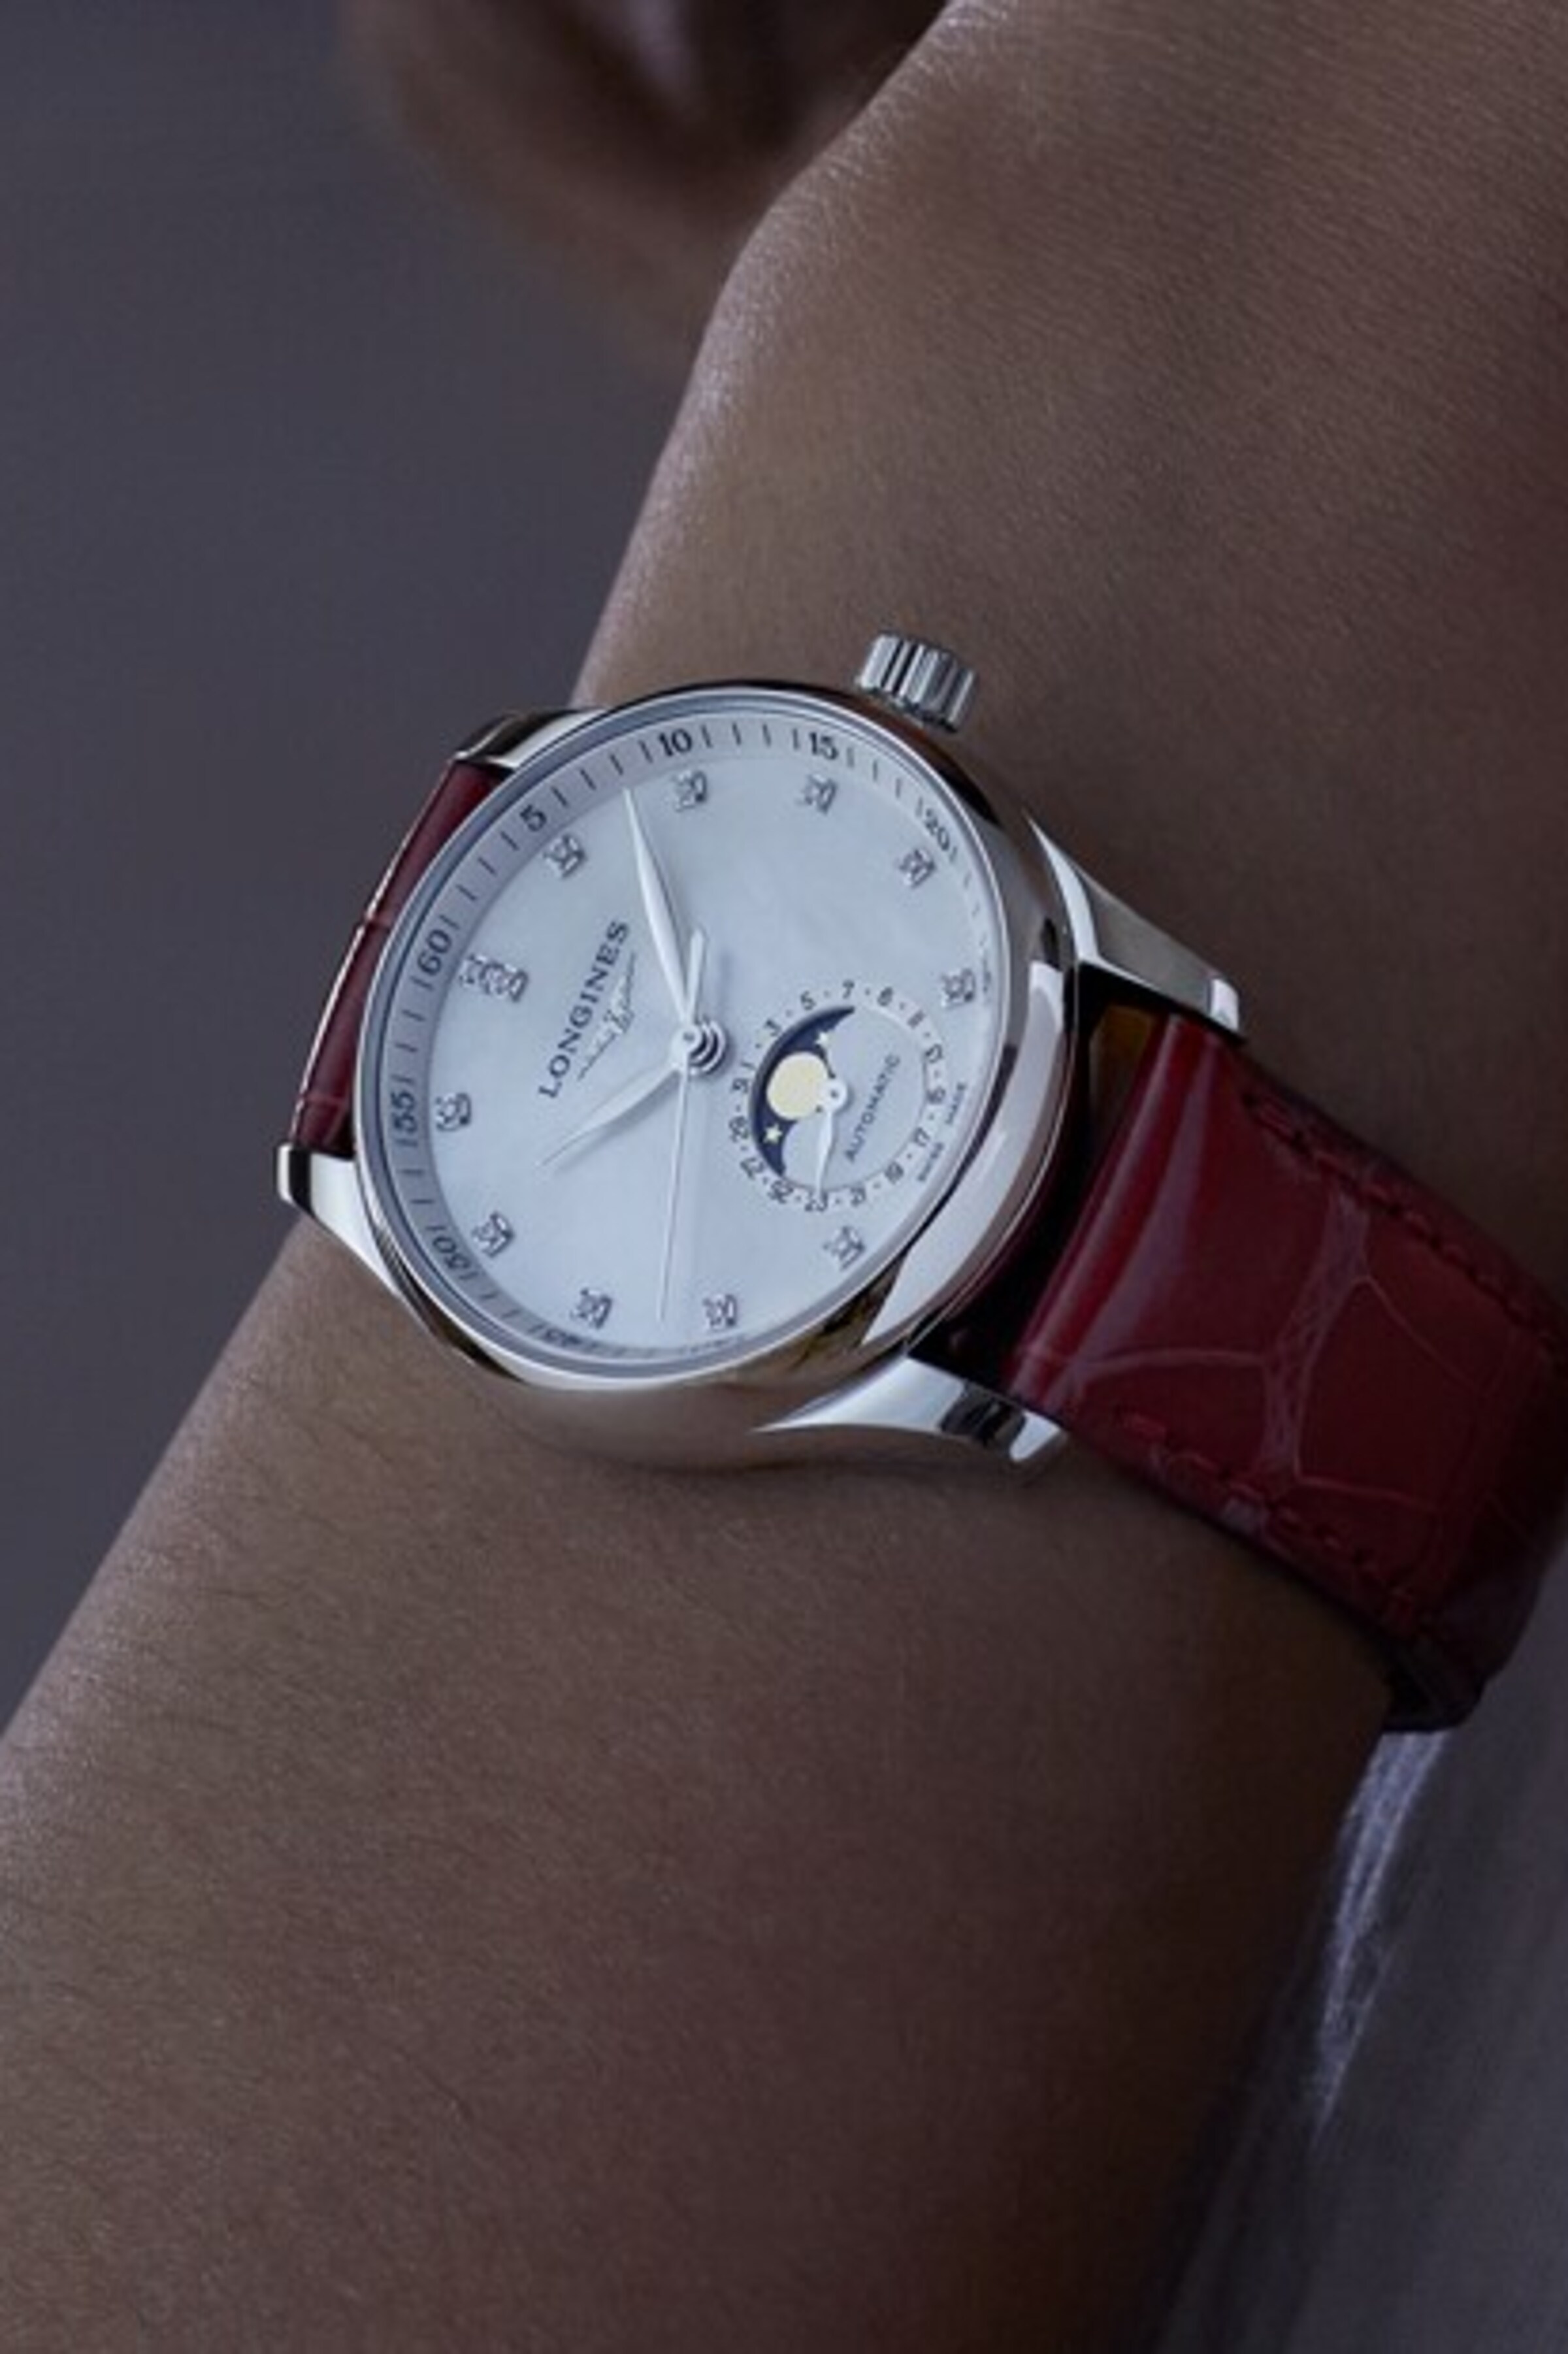 The Longines Master Collection Moonphase watch with red strap